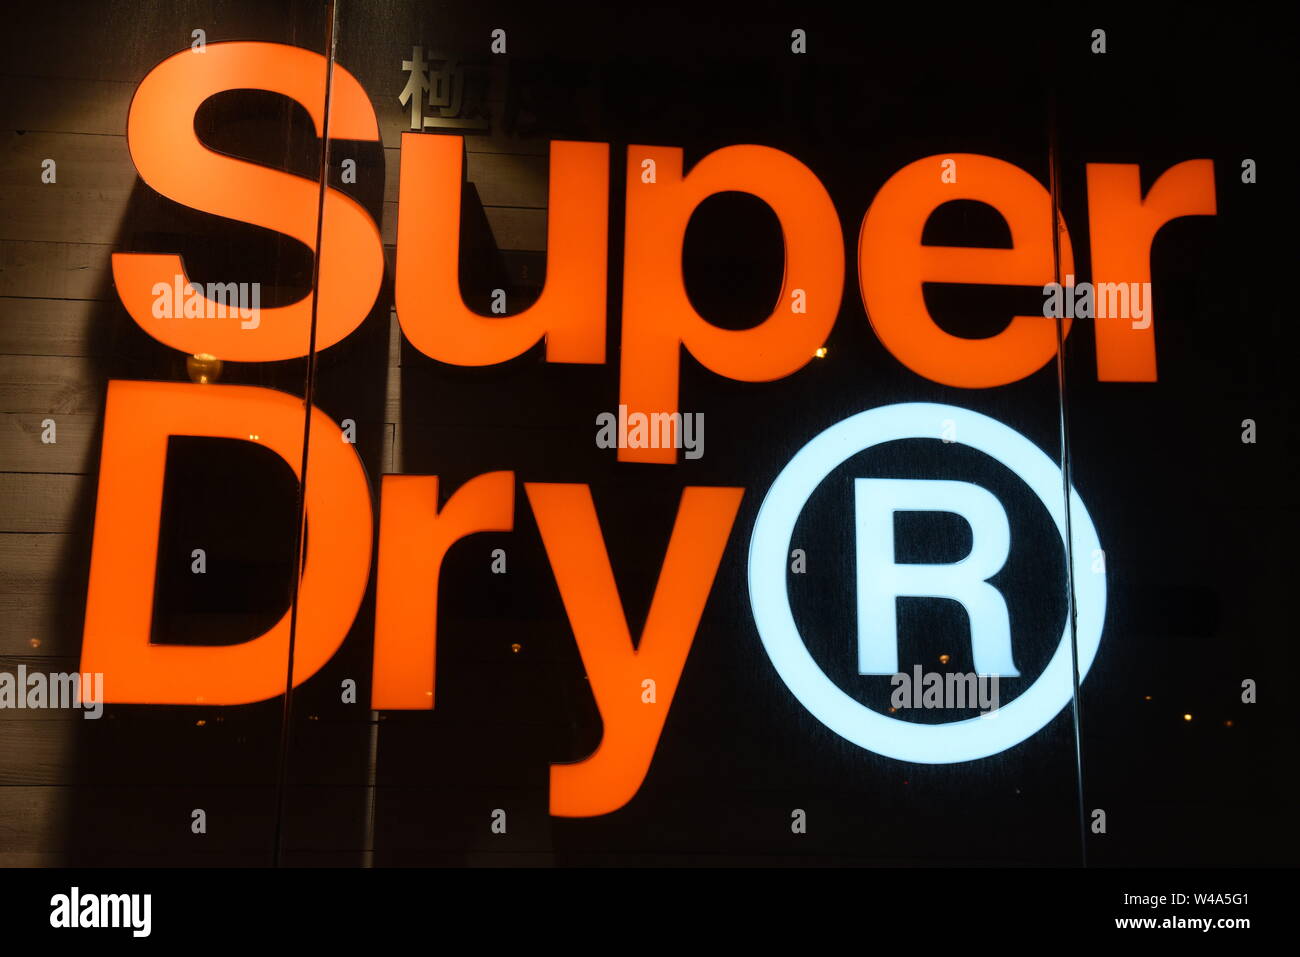 Barcelona, Spain. 19th July, 2019. The SuperDry logo seen at a